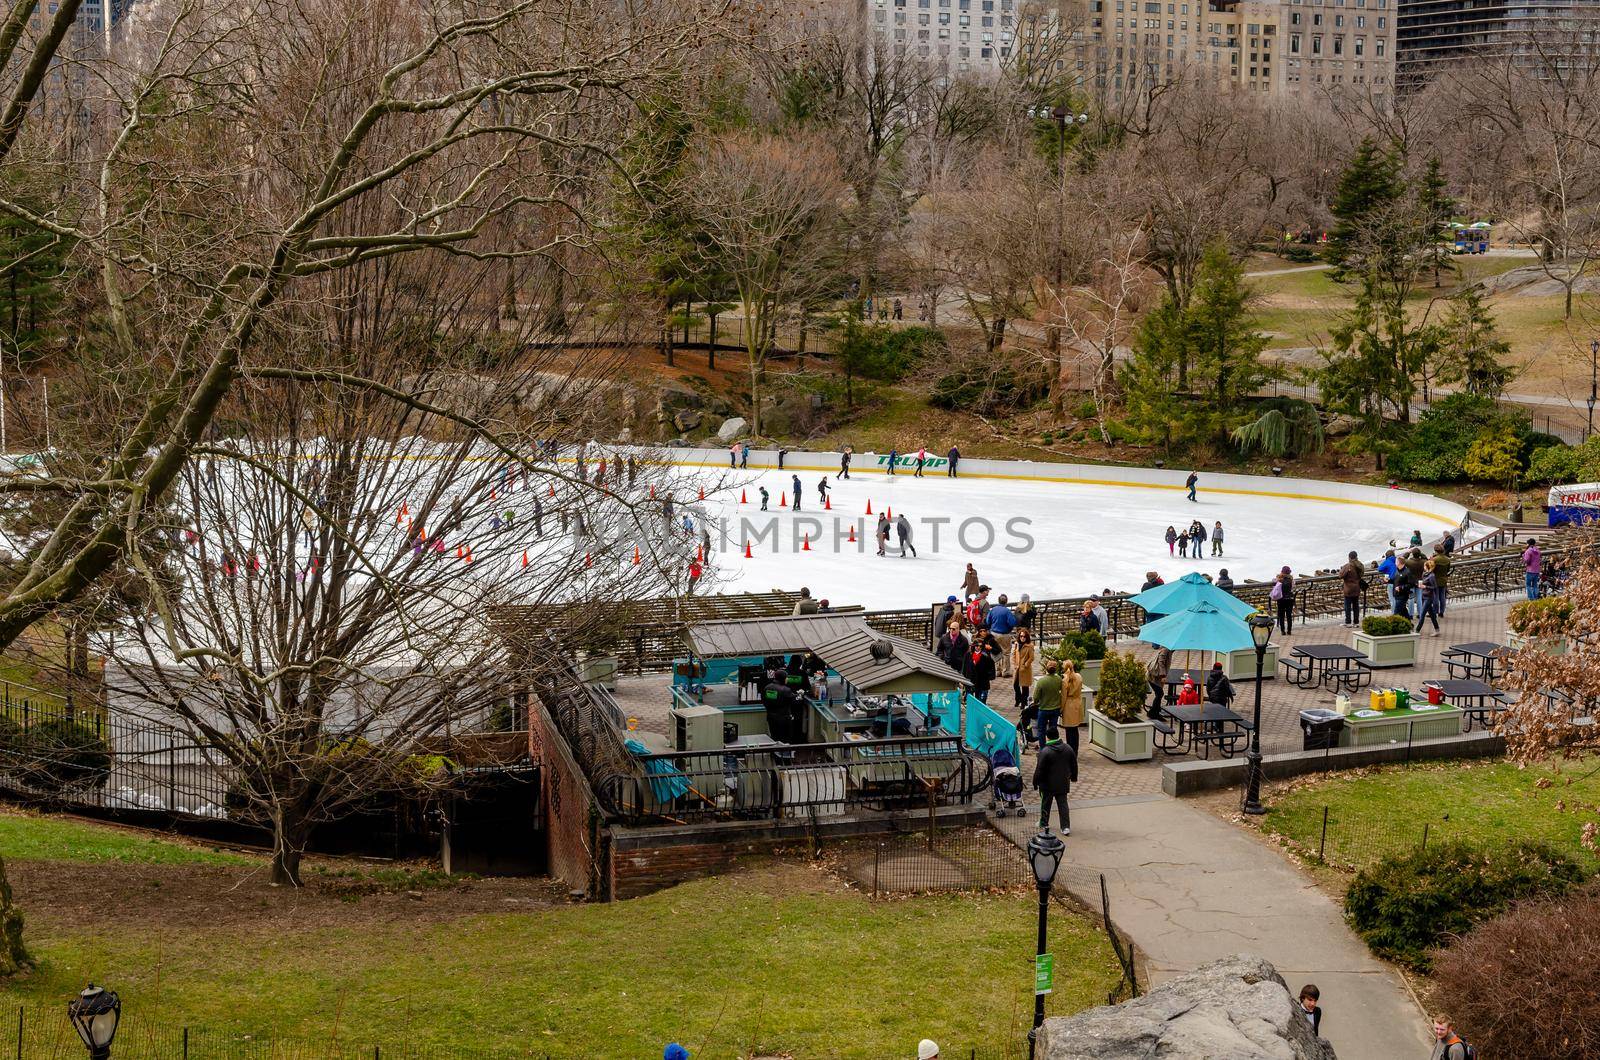 Wollman Rink with People Ice Skating during daytime in winter, view from the distance, Central Park New York City, benches and people walking in the forefront, horizontal